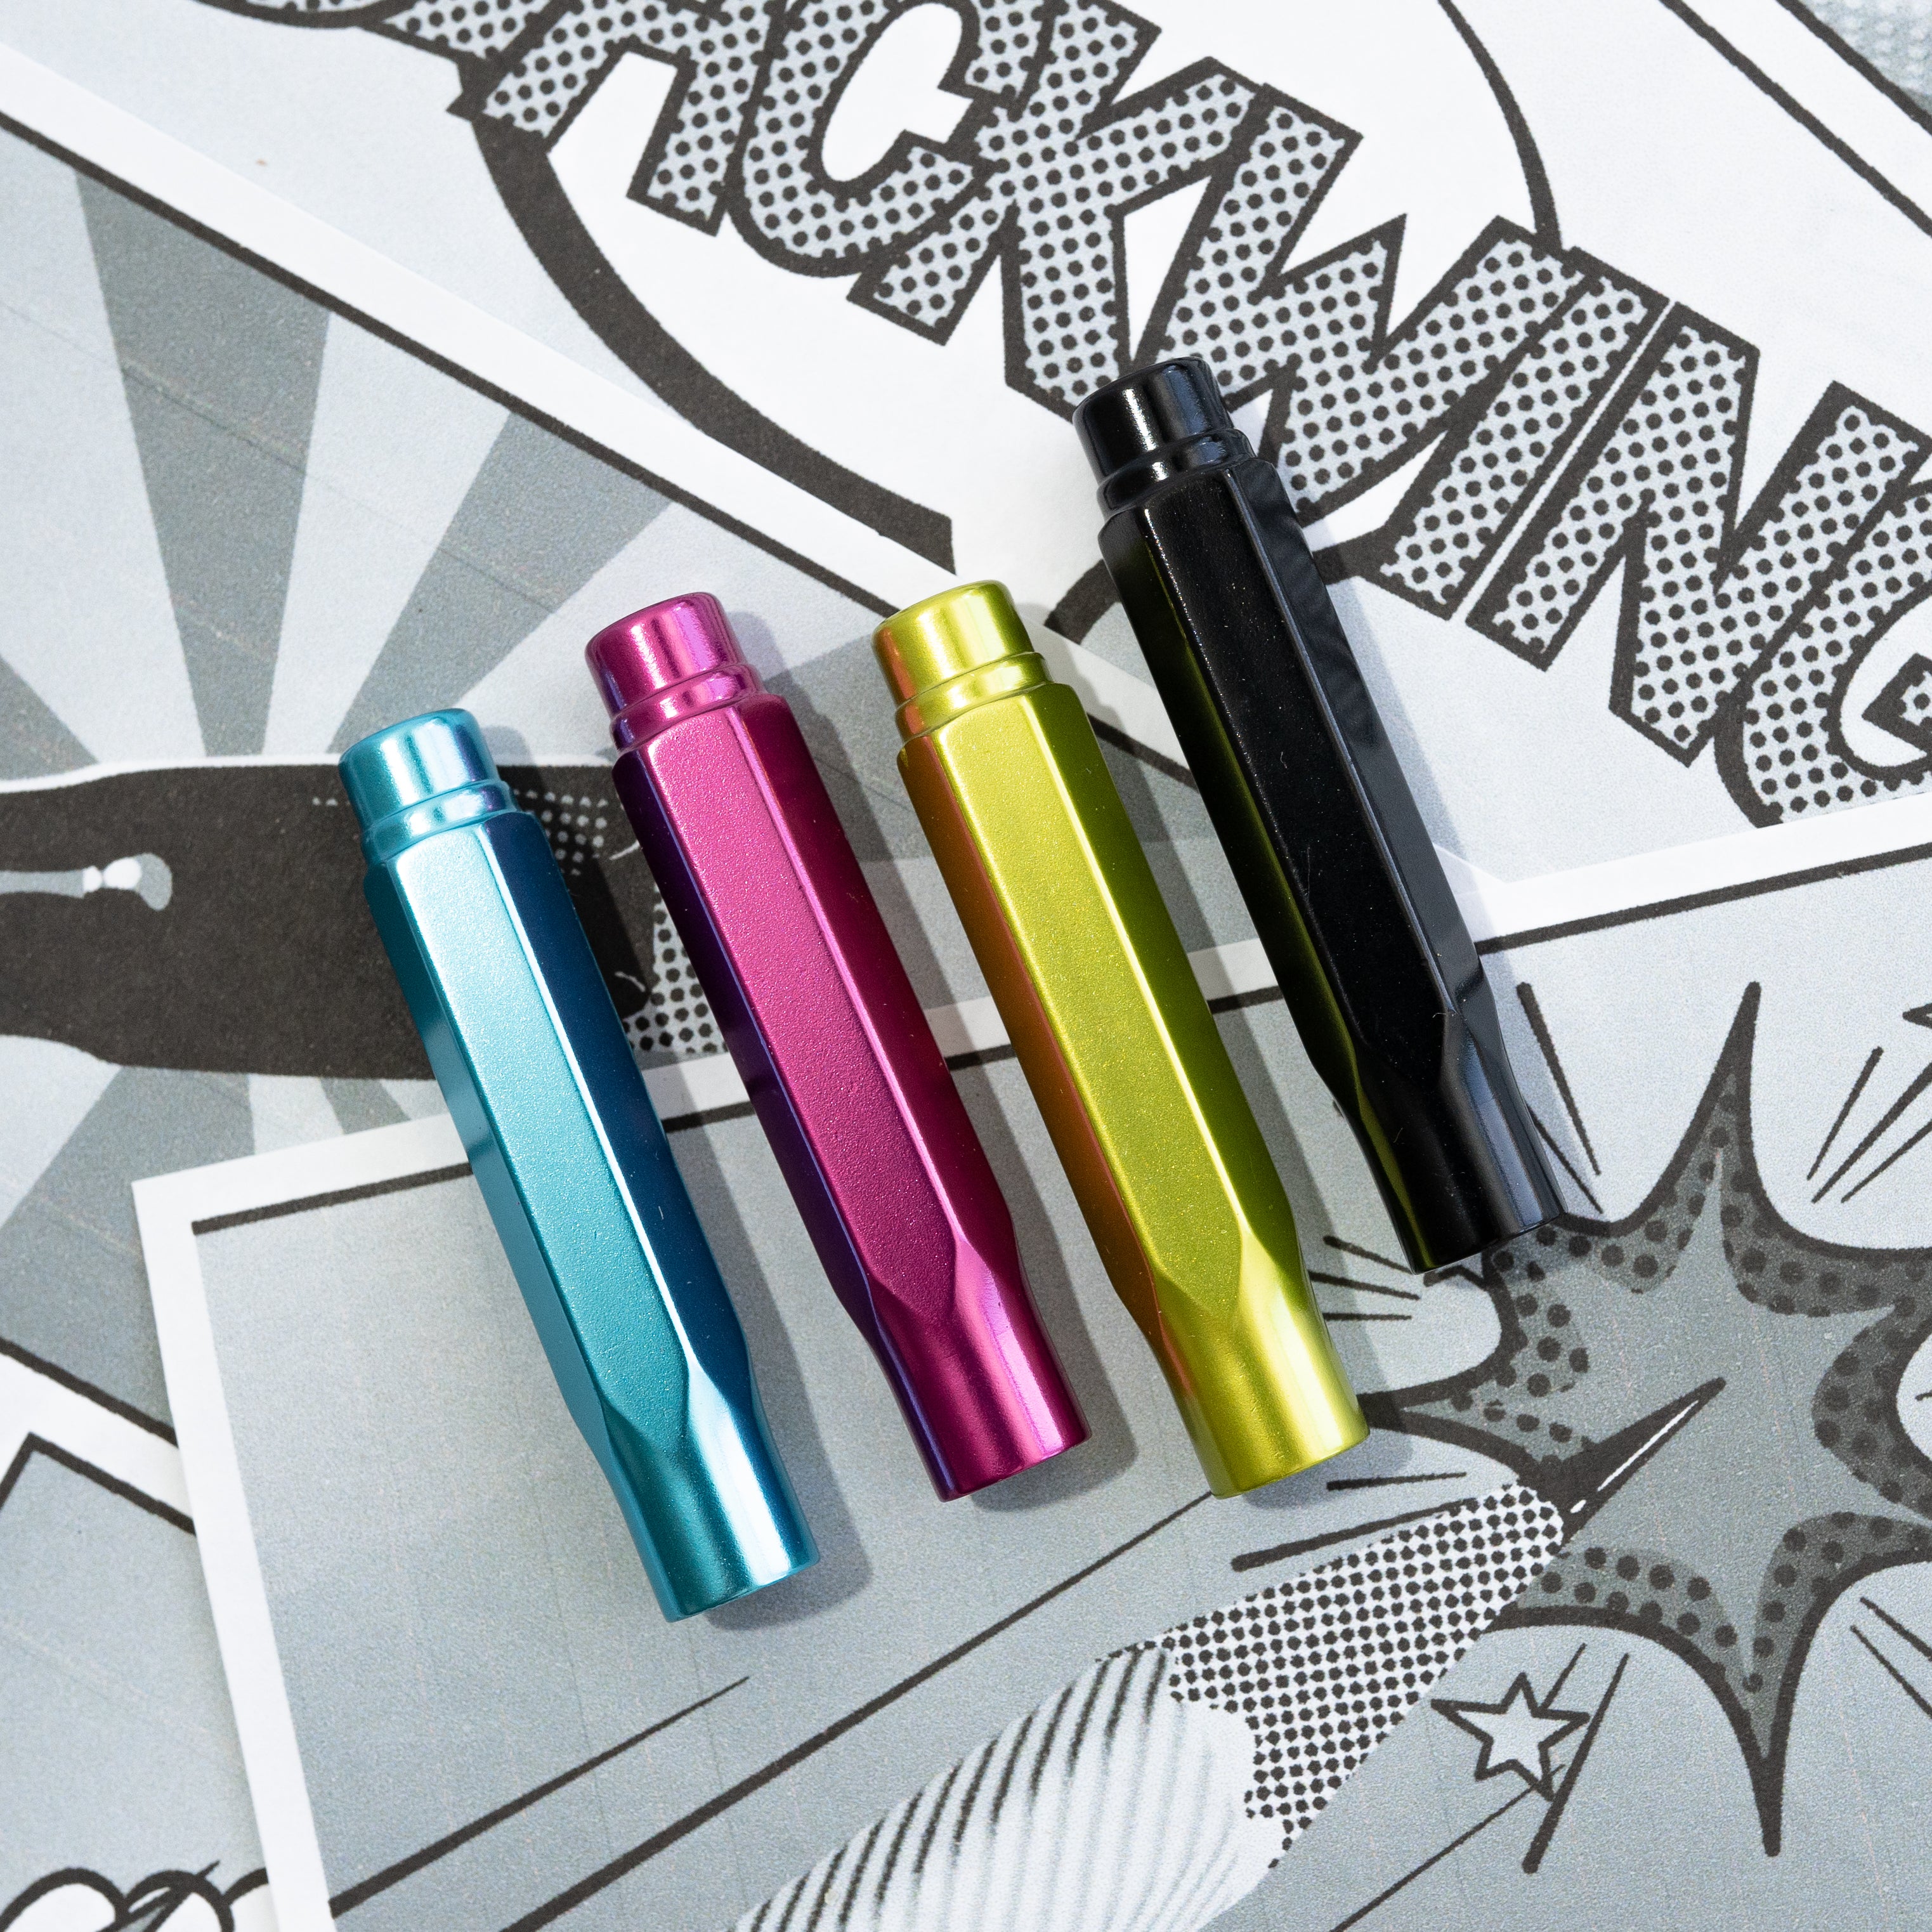 Four colorful Blackwing Volume 64 Point Guards (Set of 4) mechanical pencils lying on a graphic print surface.